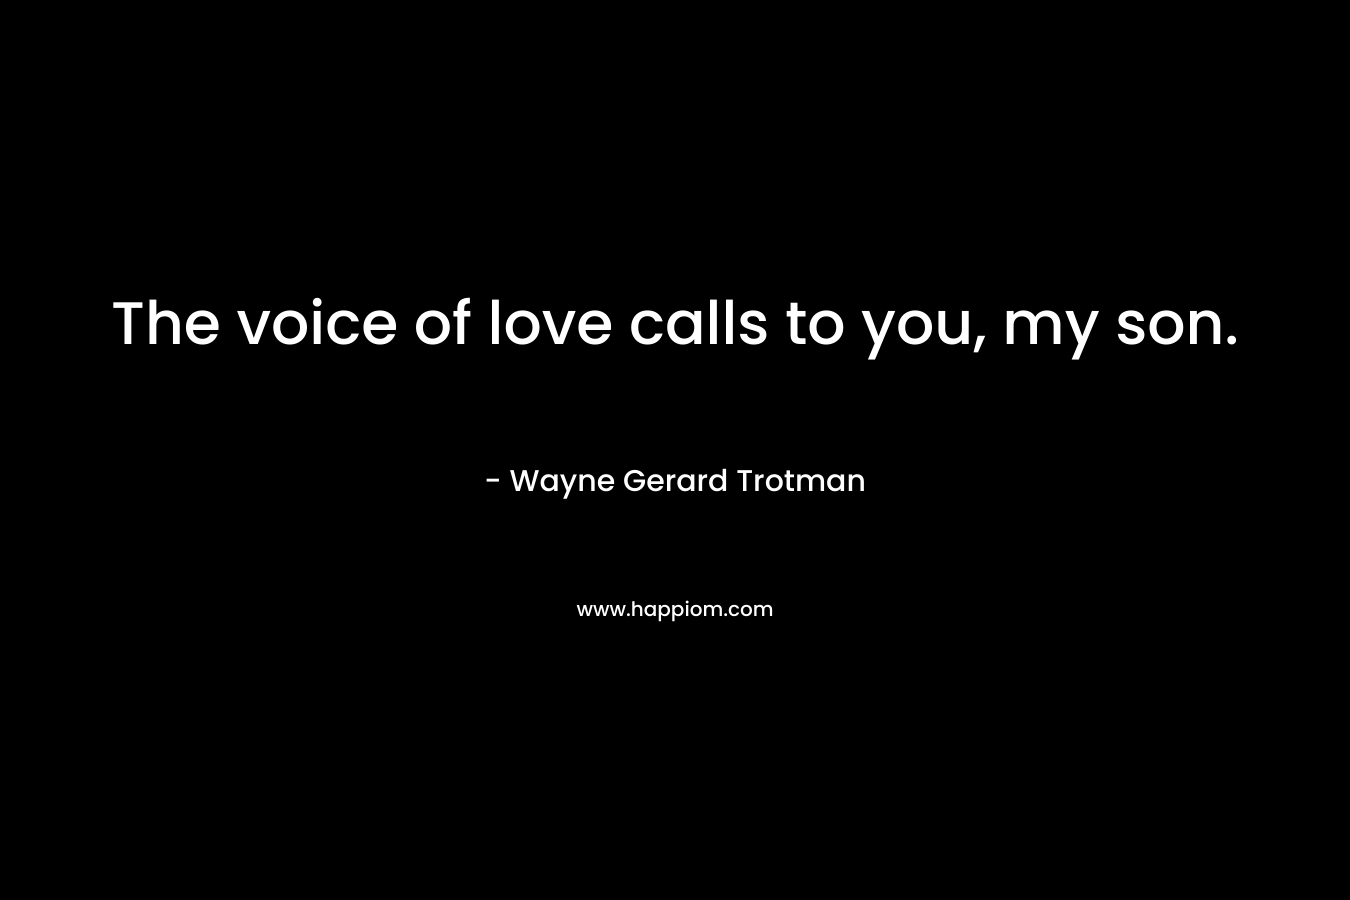 The voice of love calls to you, my son.